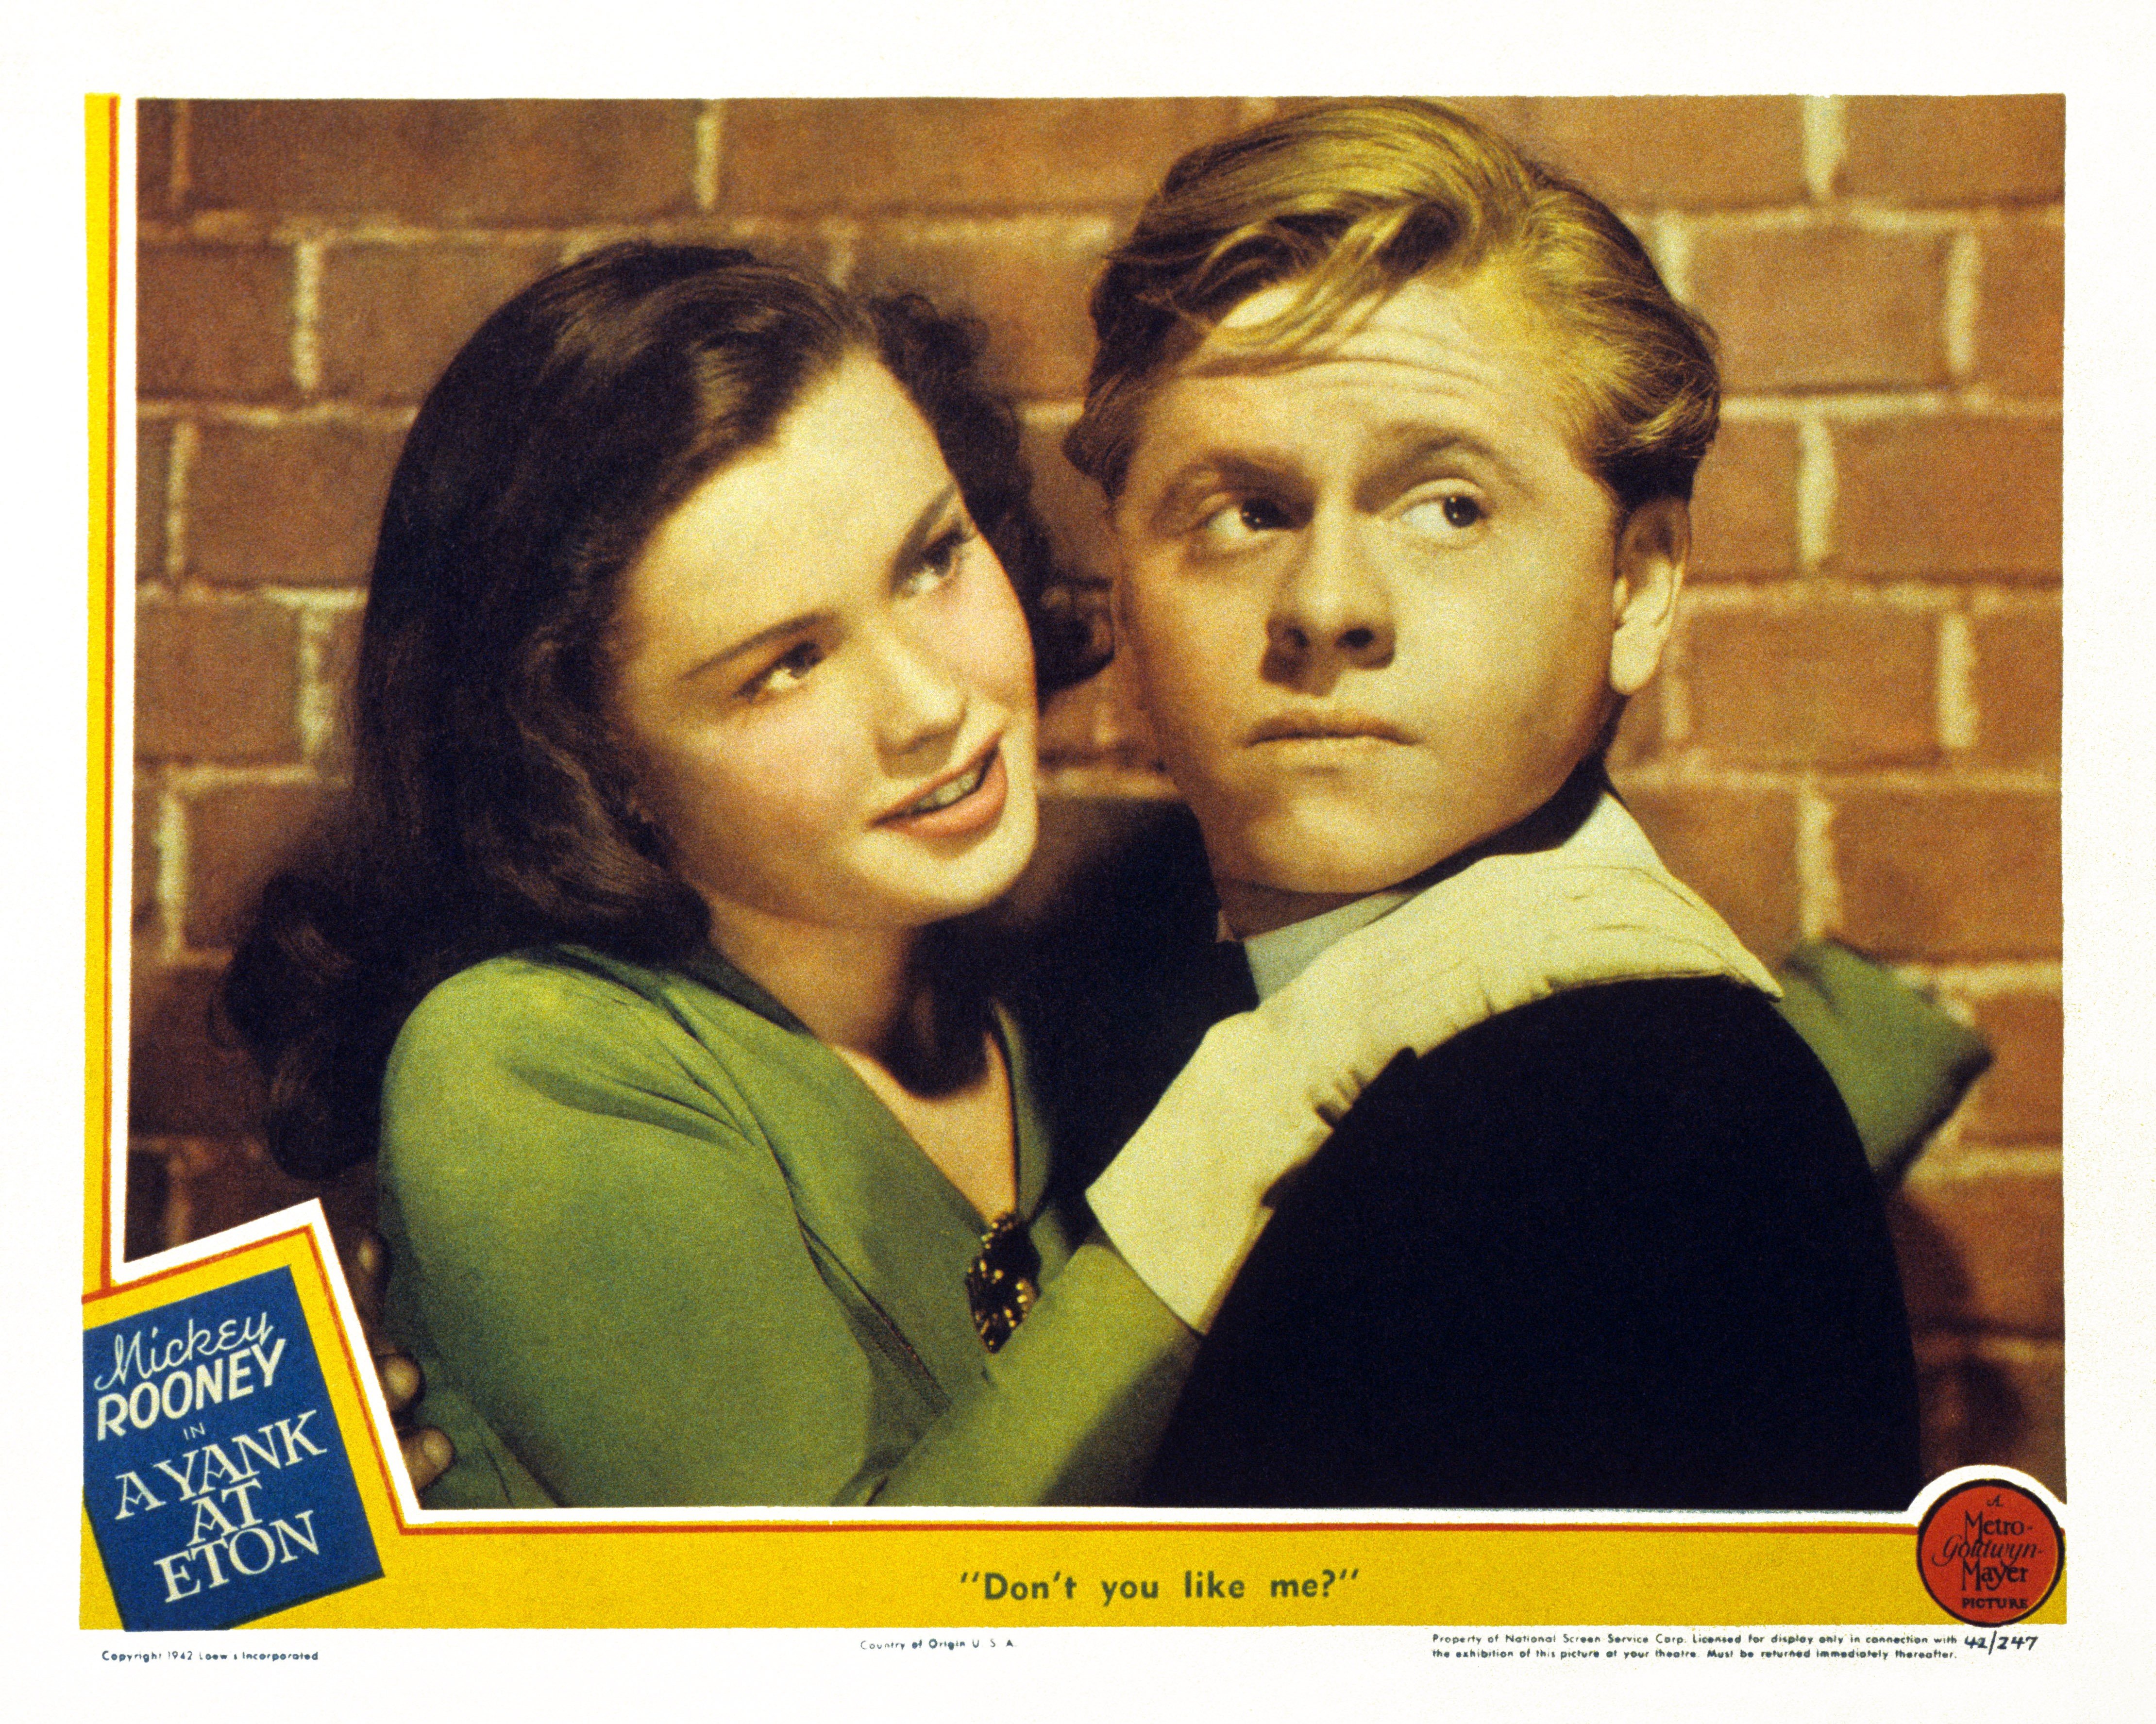 A Yank At Eton, US lobbycard, from left: Tina thayer, Mickey Rooney, 1942. | Source: Getty Images